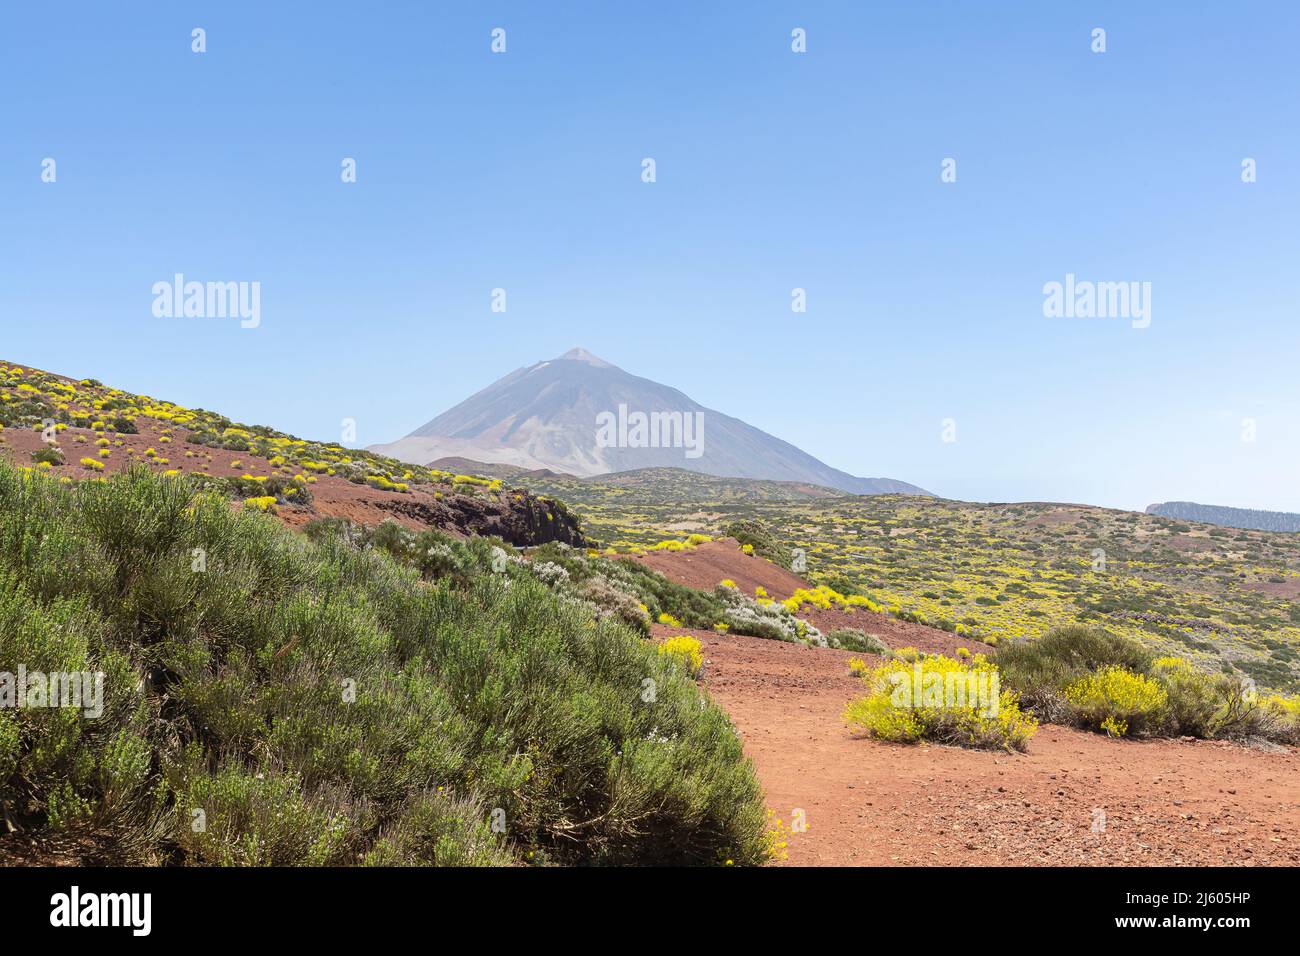 Landscapes and views of the Teide volcano on the island of Tenerife, located in the Teide National Park, its summit is the highest point in Spain Stock Photo